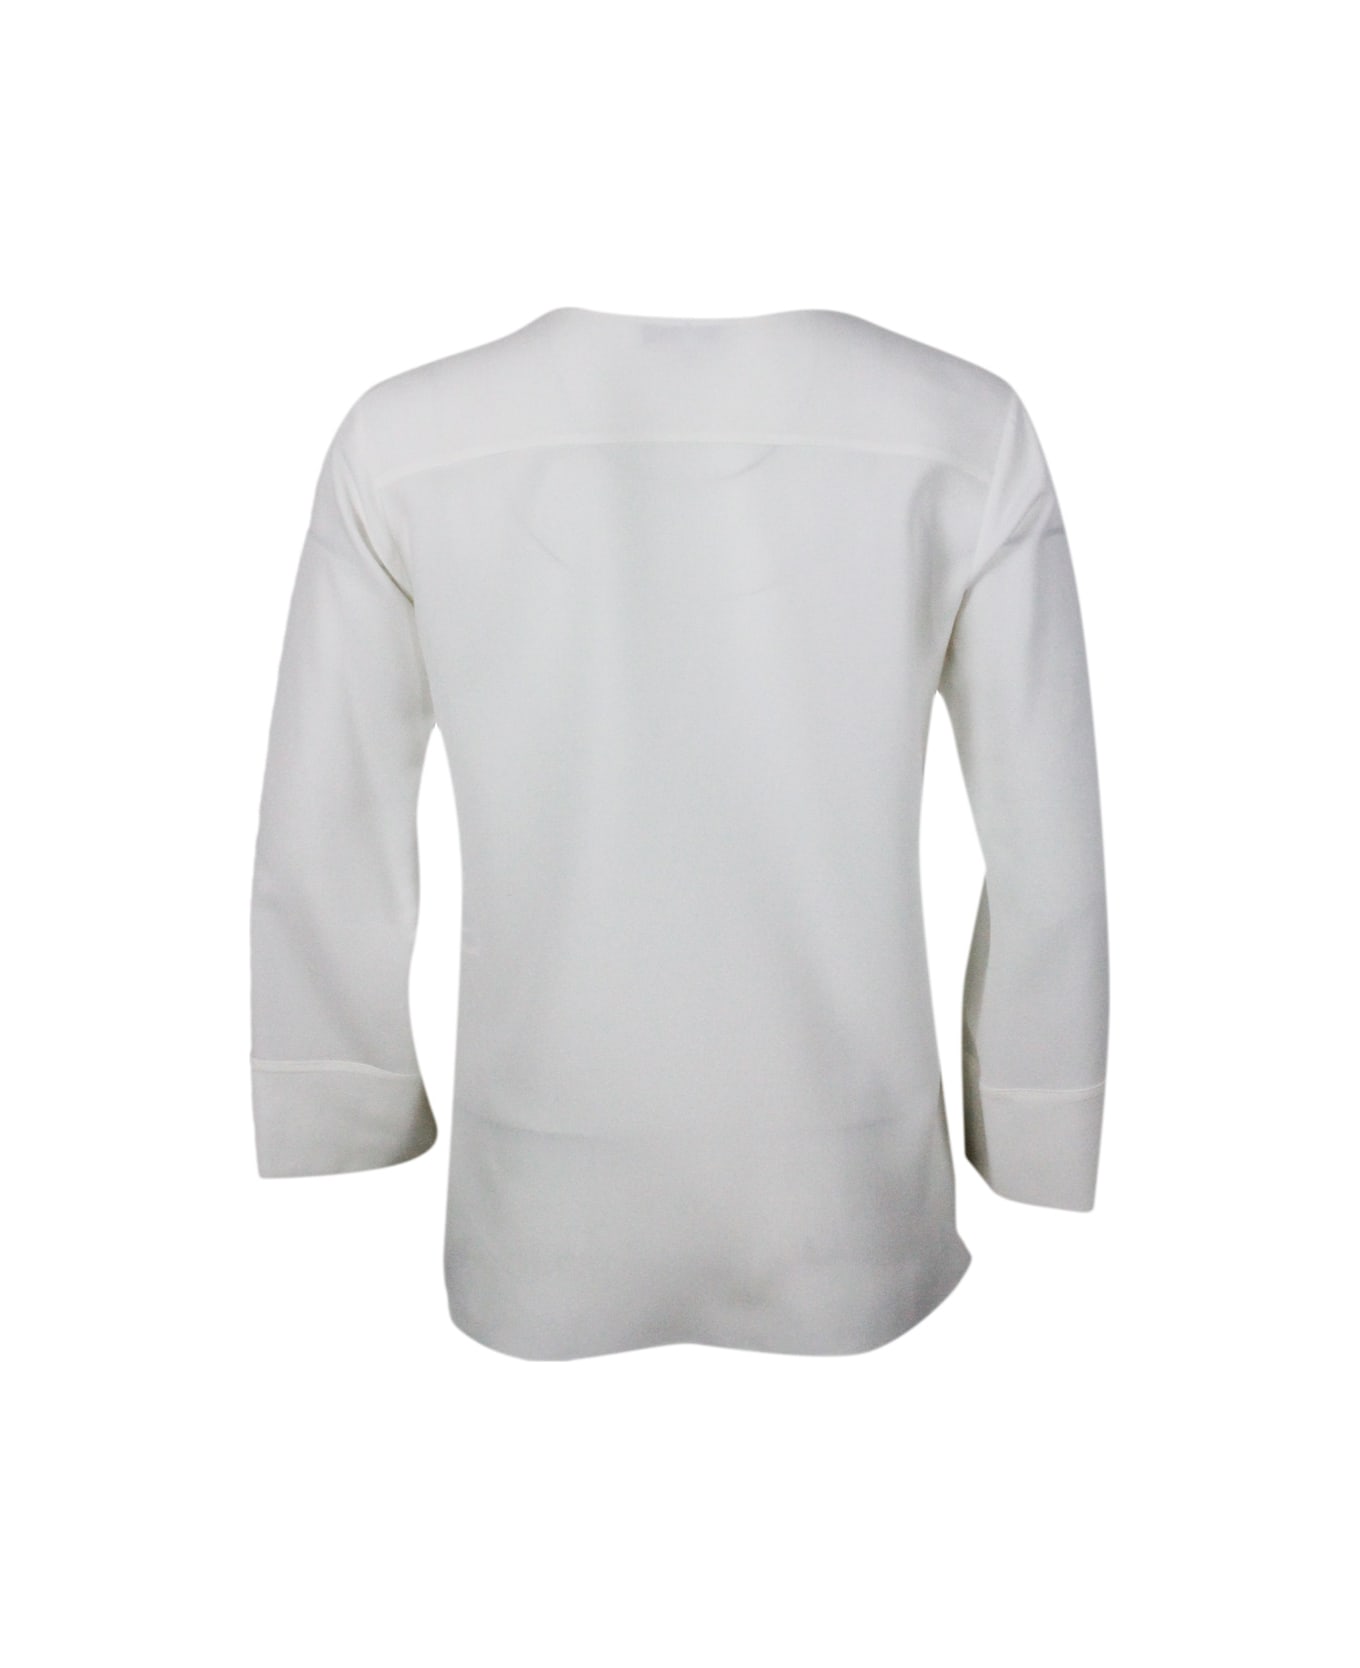 Antonelli Lightweight Shirt In Stretch Silk Crepes With V-neck. Fluid Fit - cream ブラウス